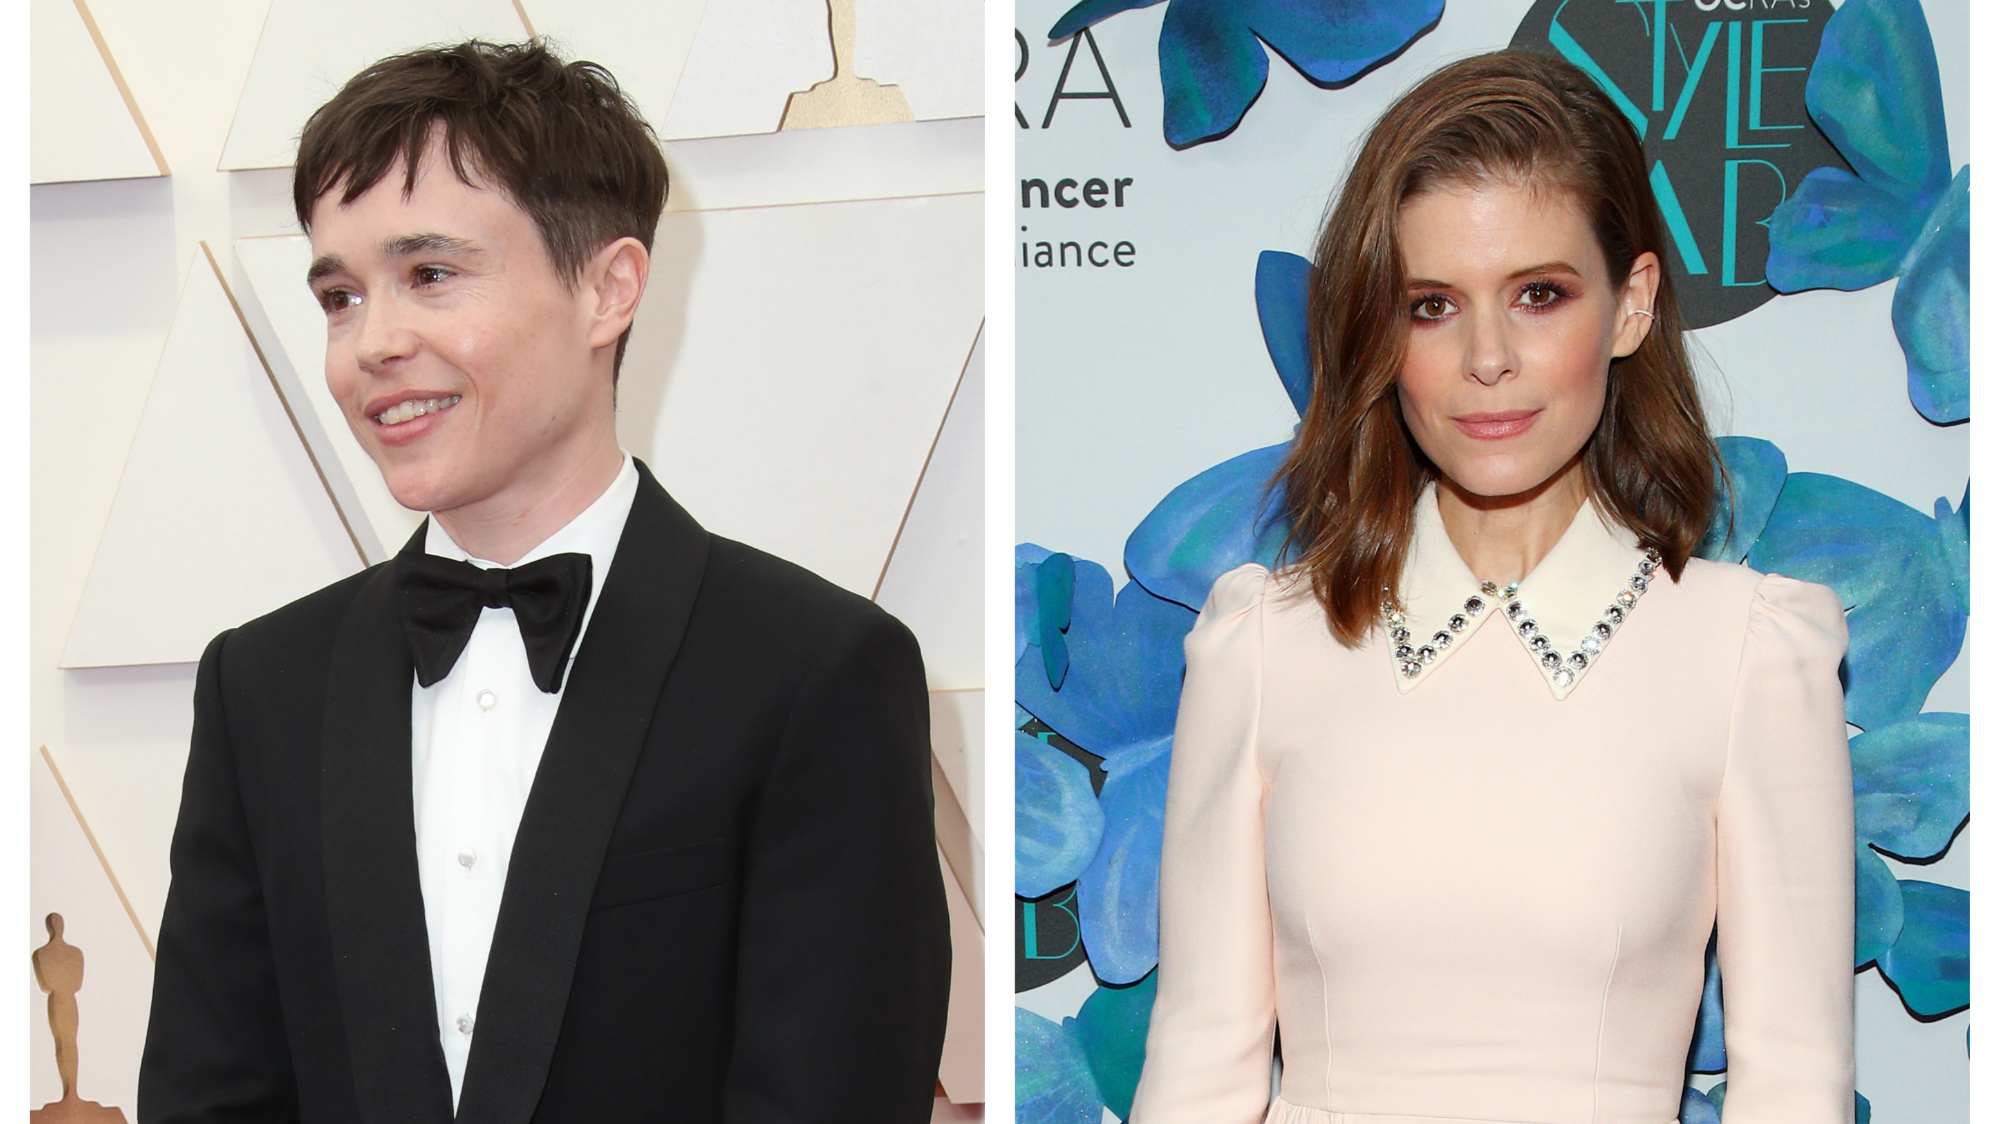 Elliot Page is opening up about his previous relationship with actress Kate Mara.